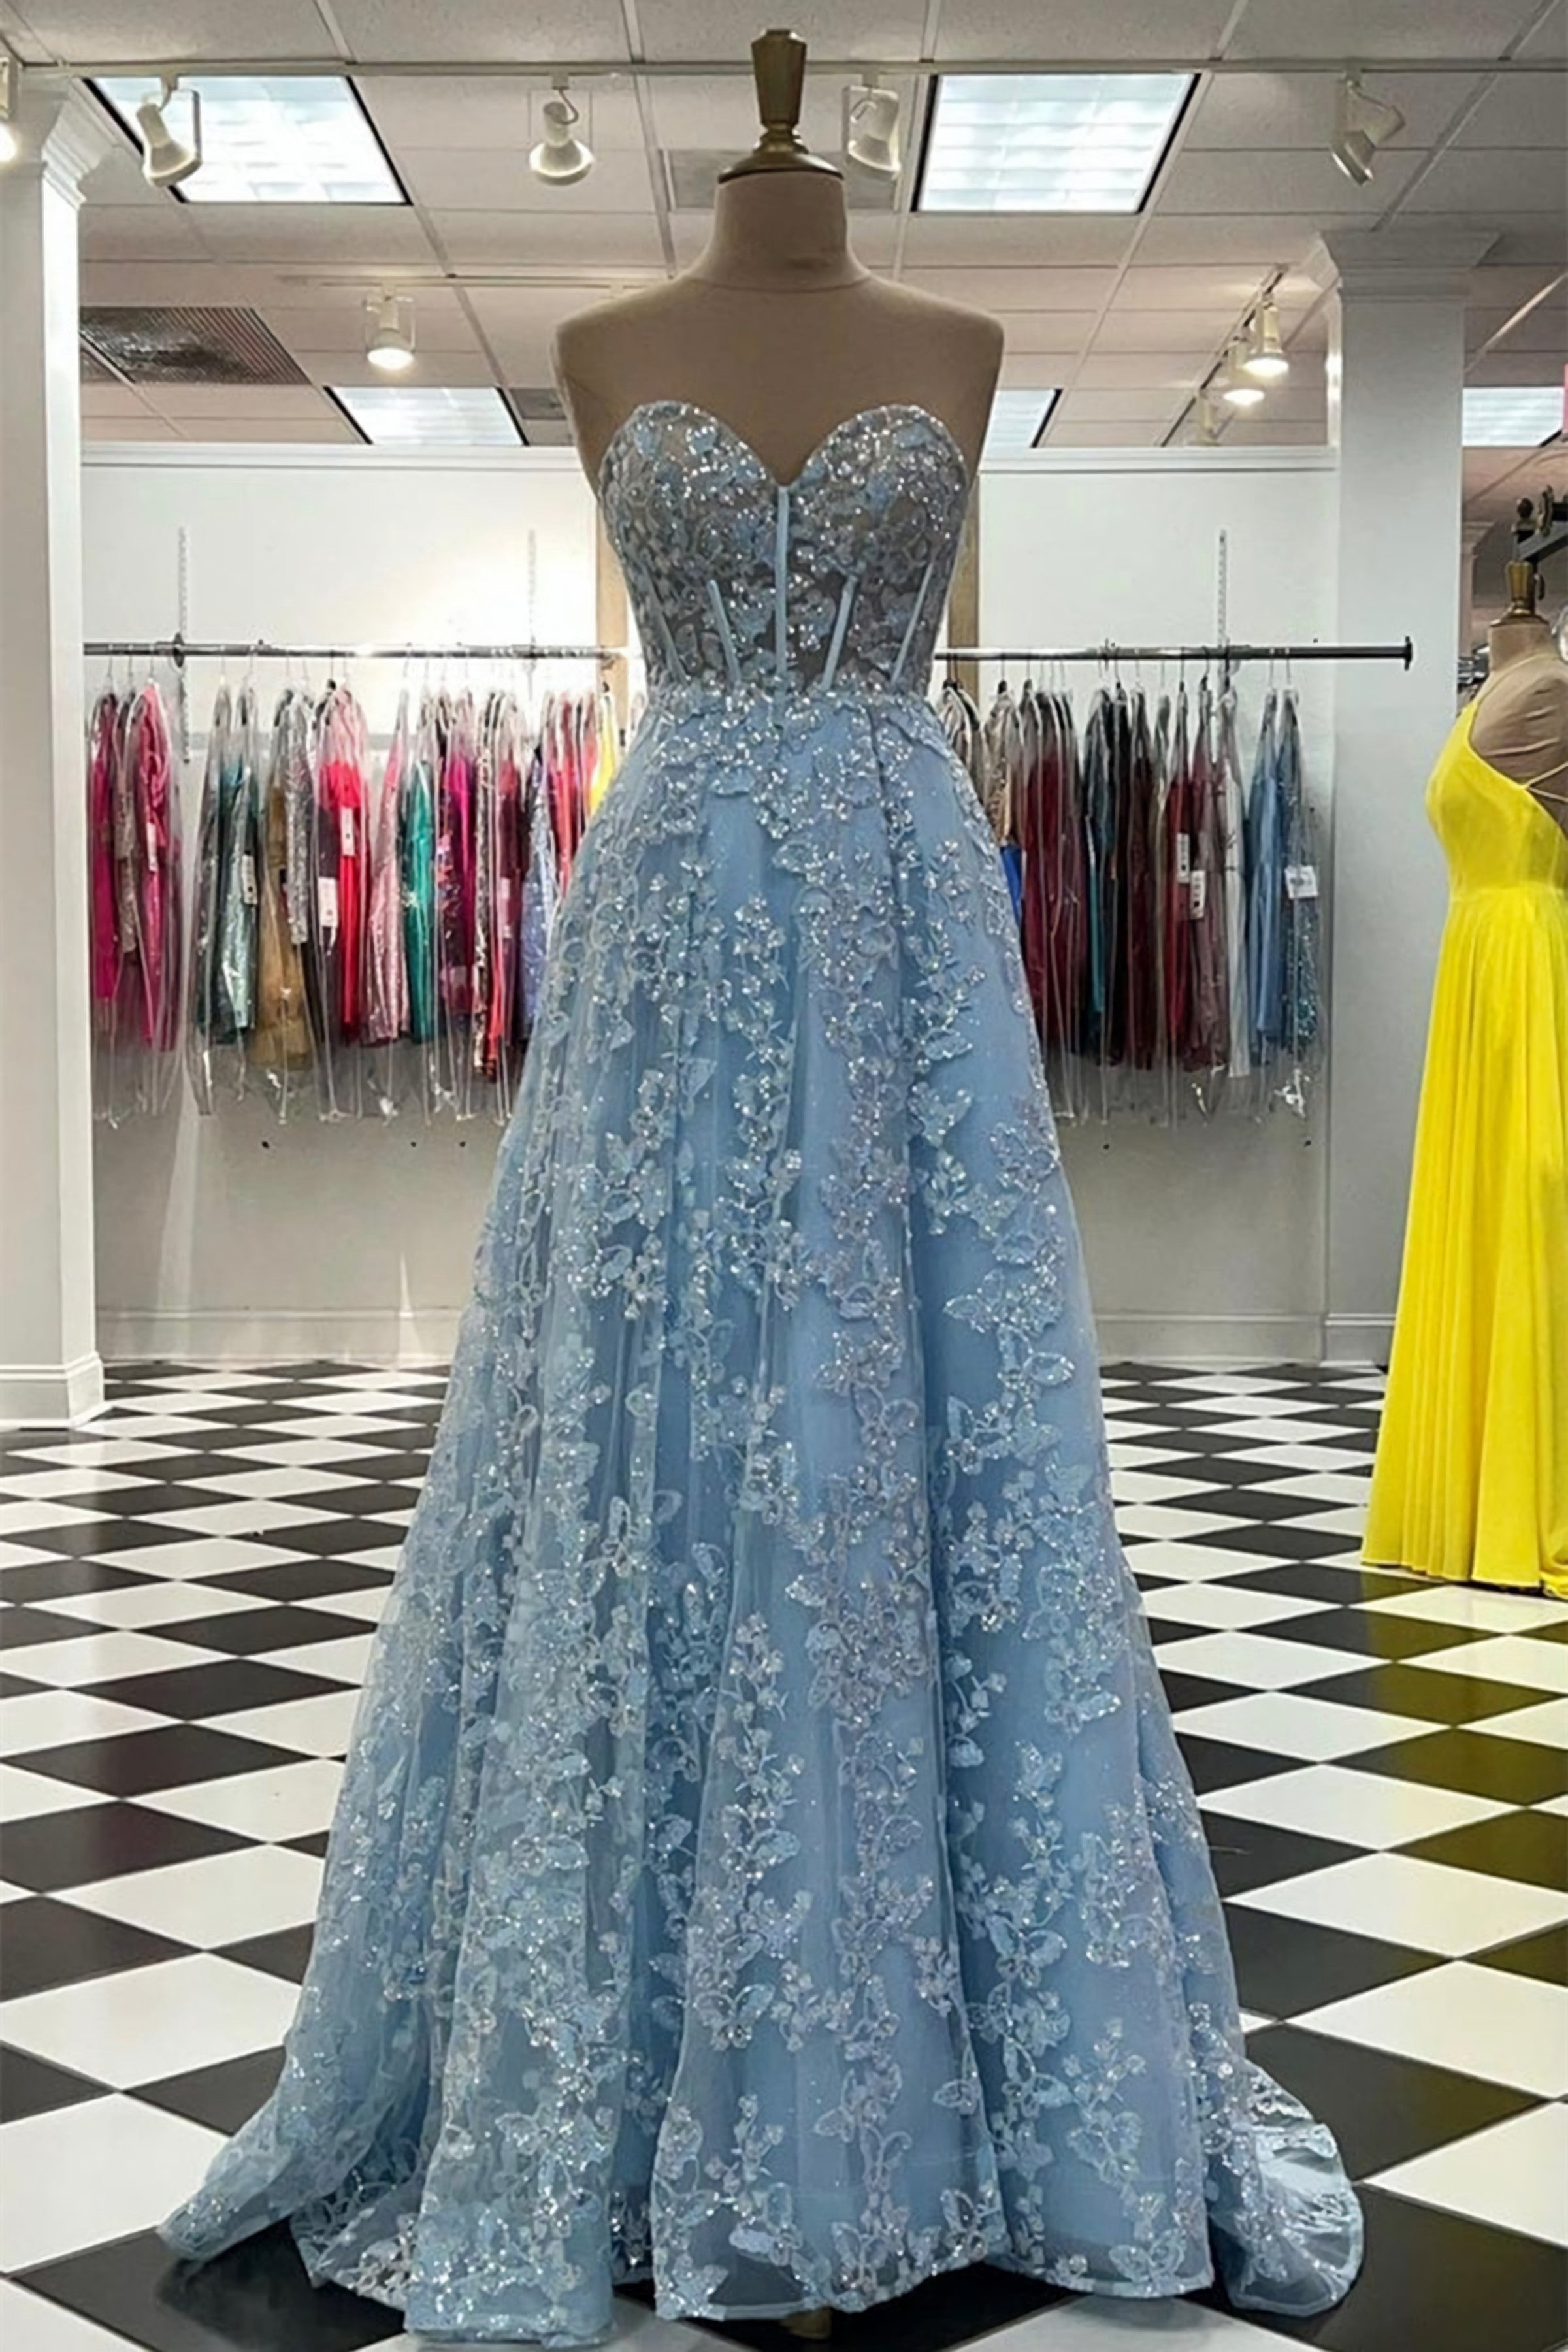 Formal Dress On Sale, Sweetheart Neck Blue Lace Appliques Long Prom Dress, With Long Sleeves Blue Lace Floral Formal Graduation Evening Dress